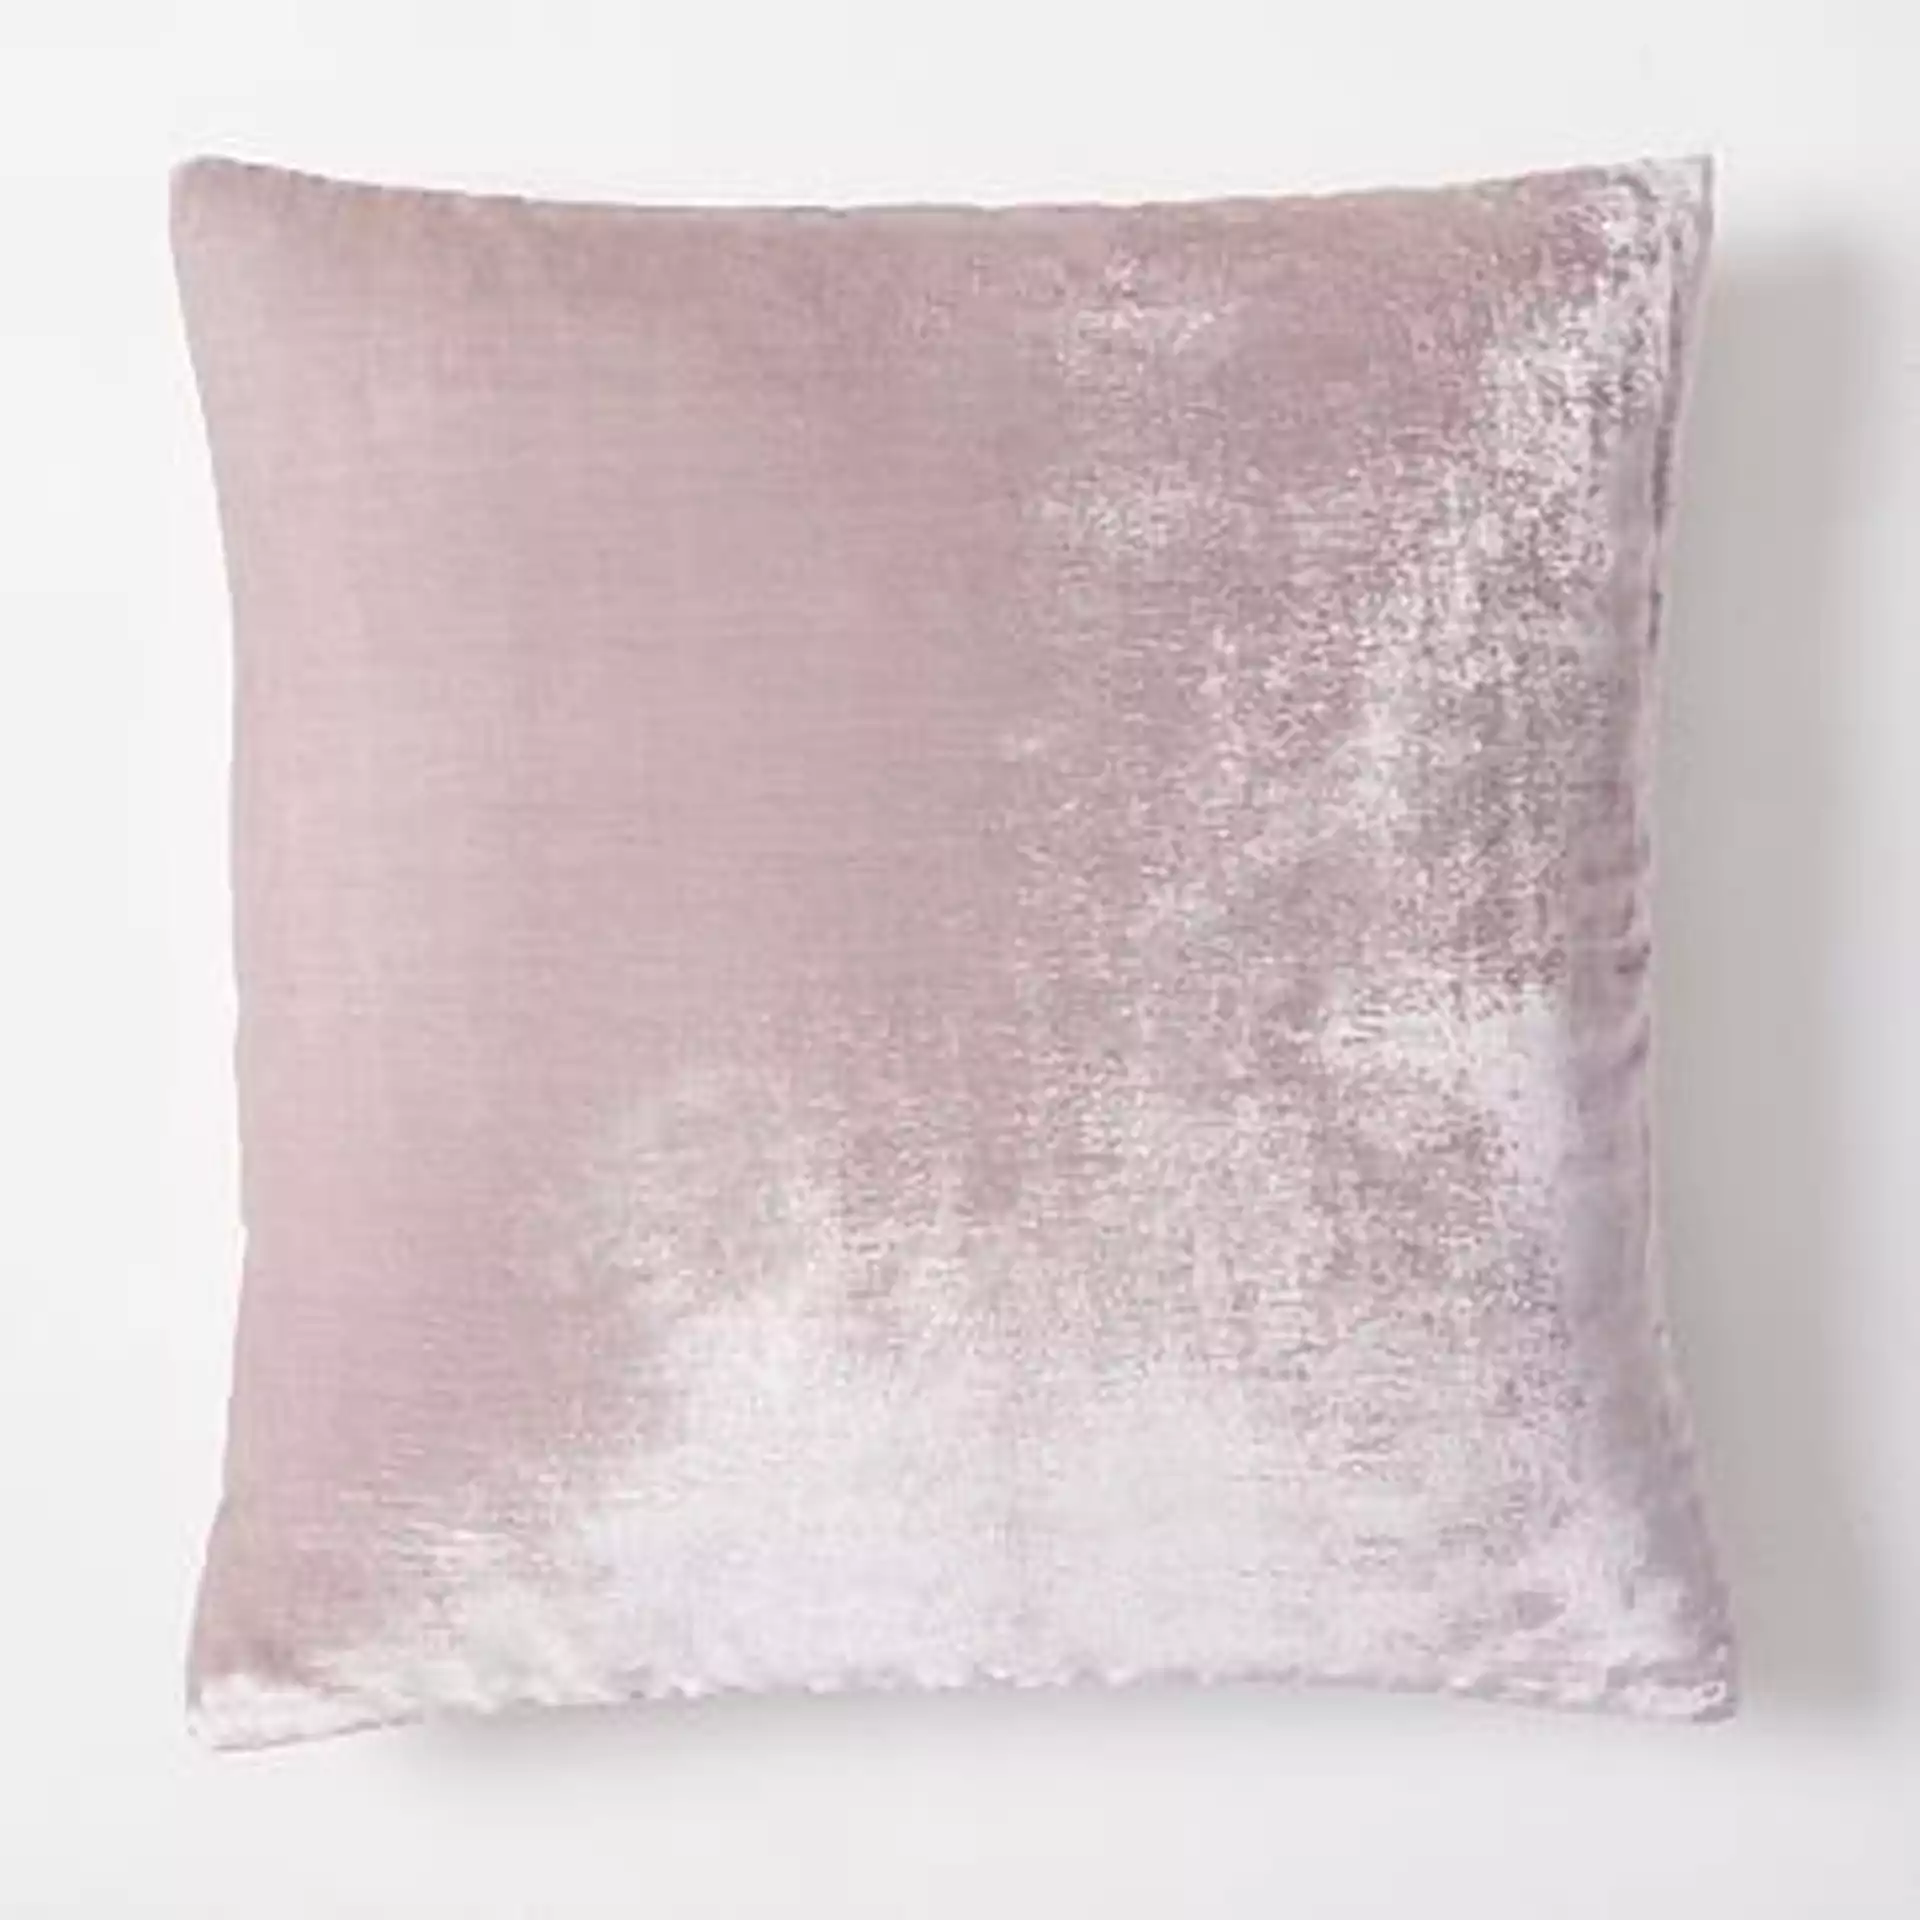 Lush Velvet Pillow Cover, 24"x24", Washed Ruby